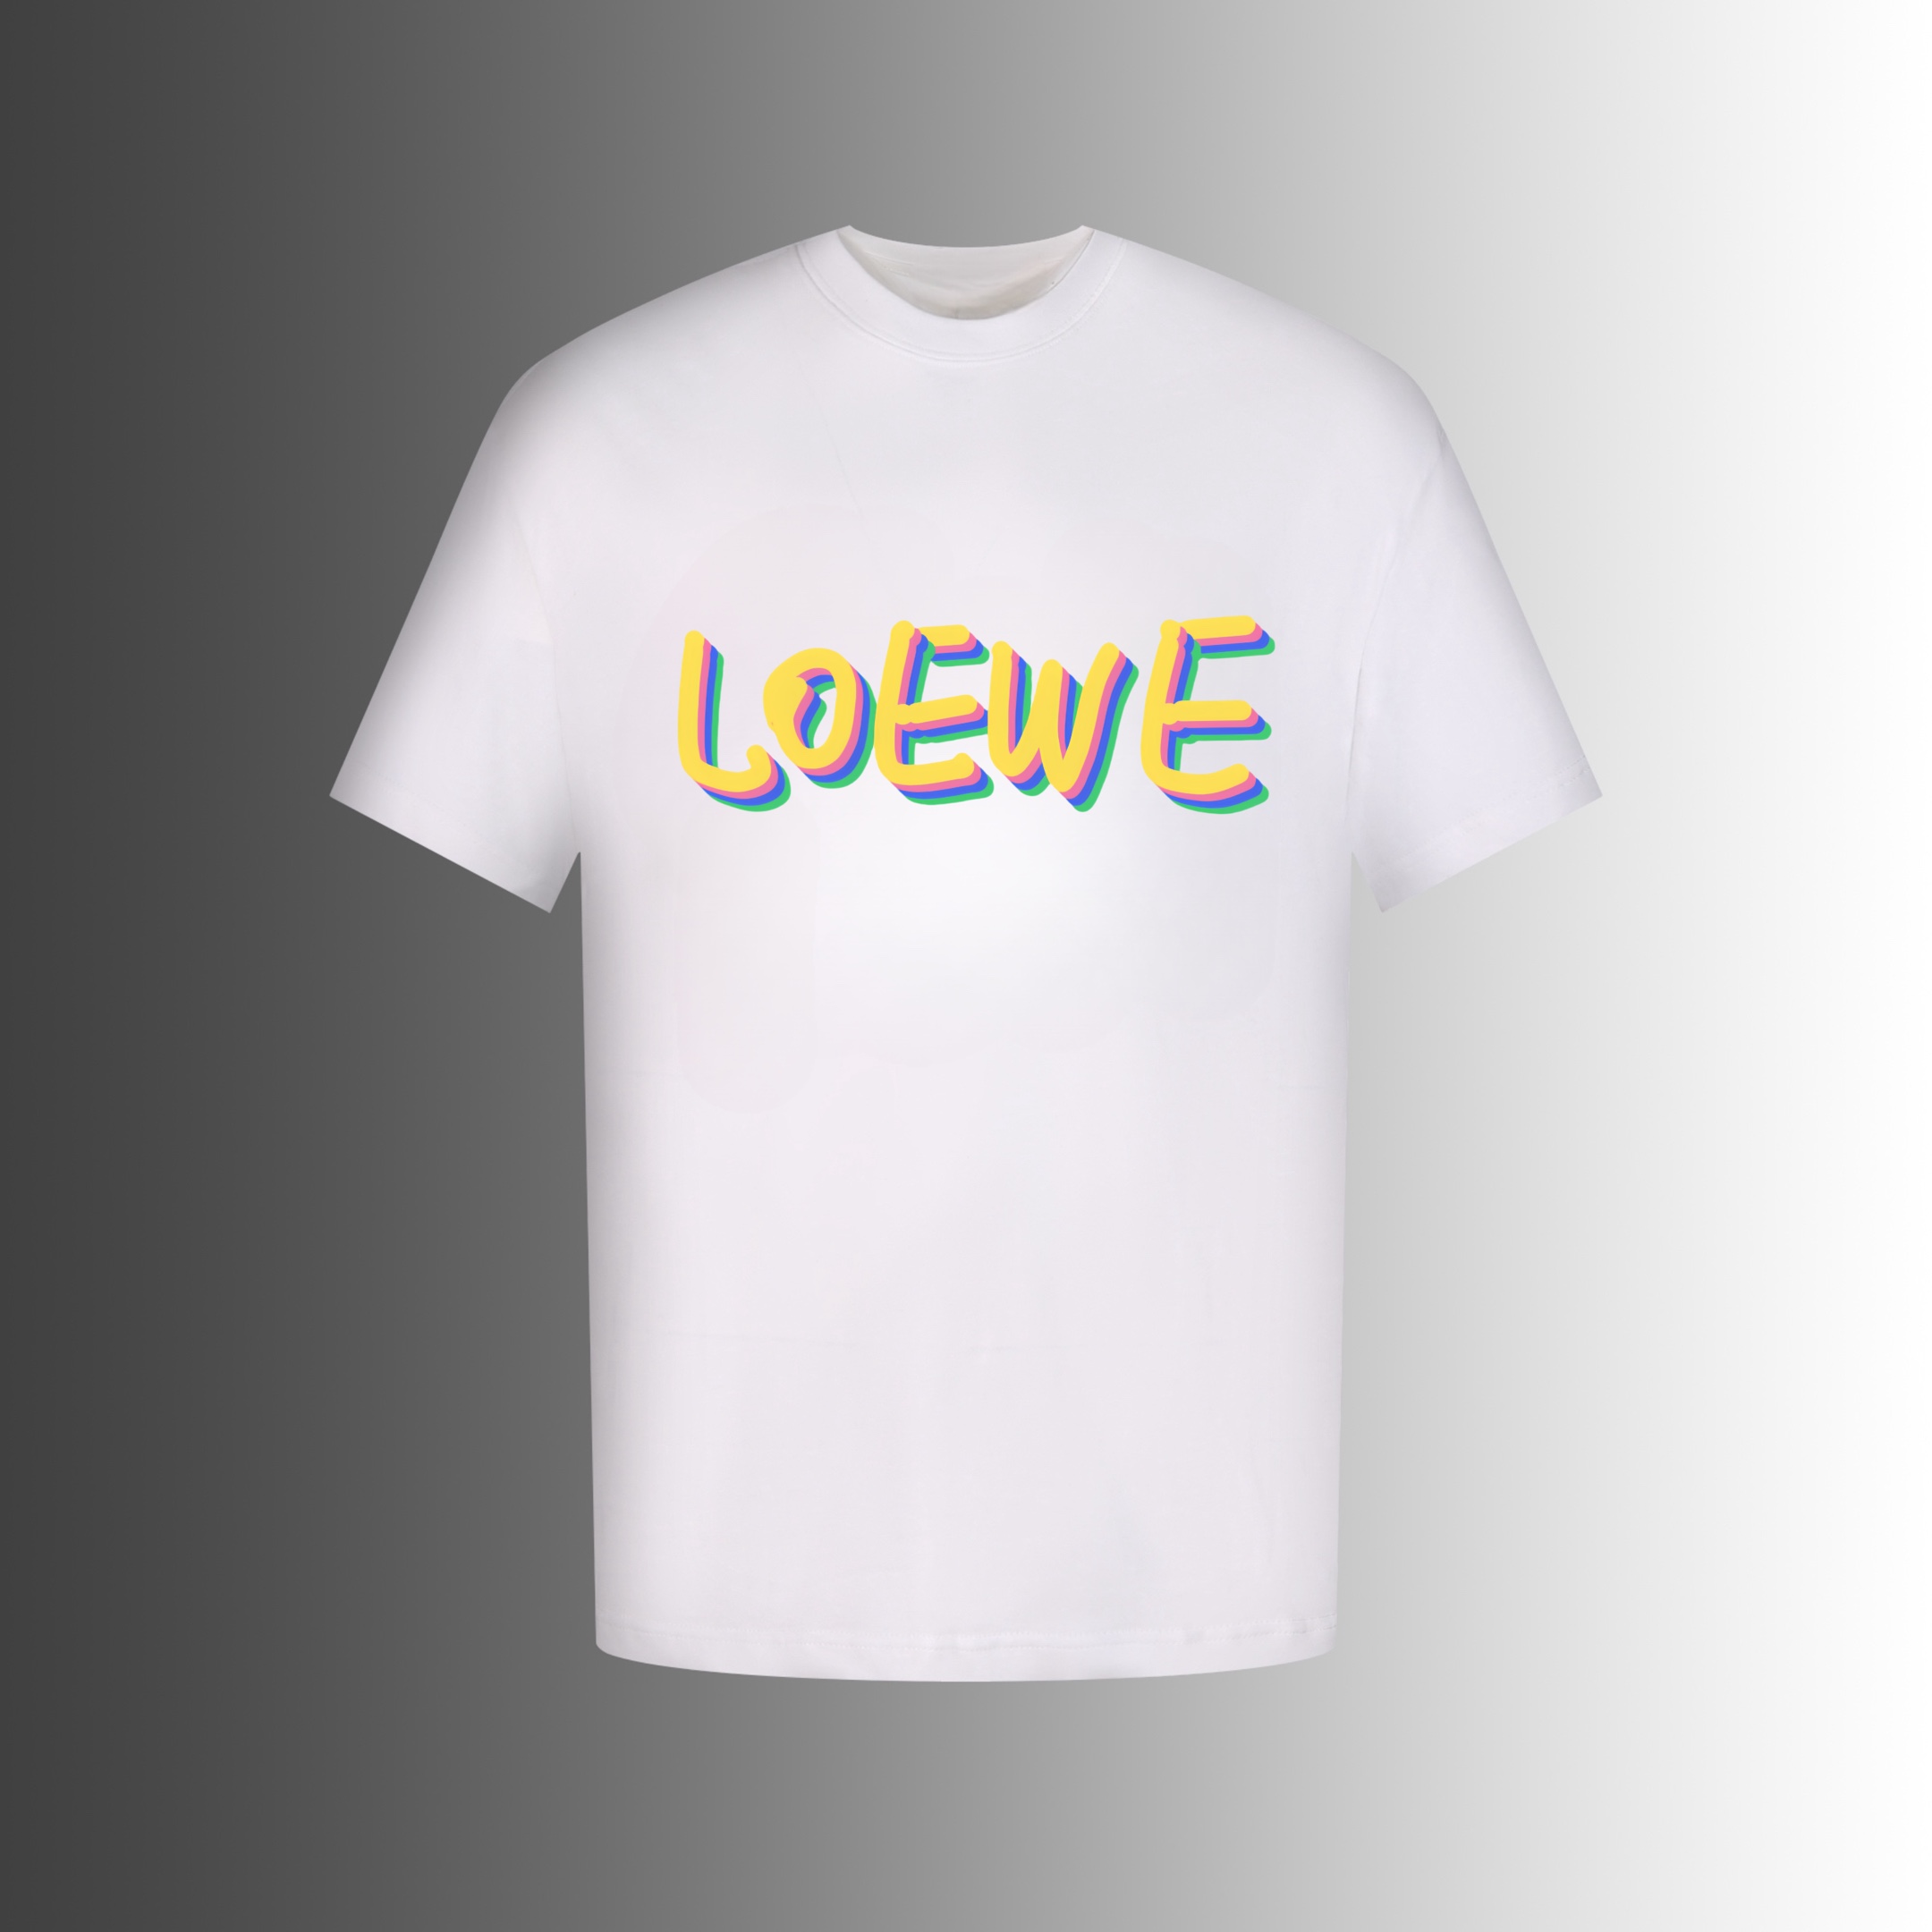 Loewe Clothing T-Shirt Printing Unisex Cotton Spring/Summer Collection Short Sleeve